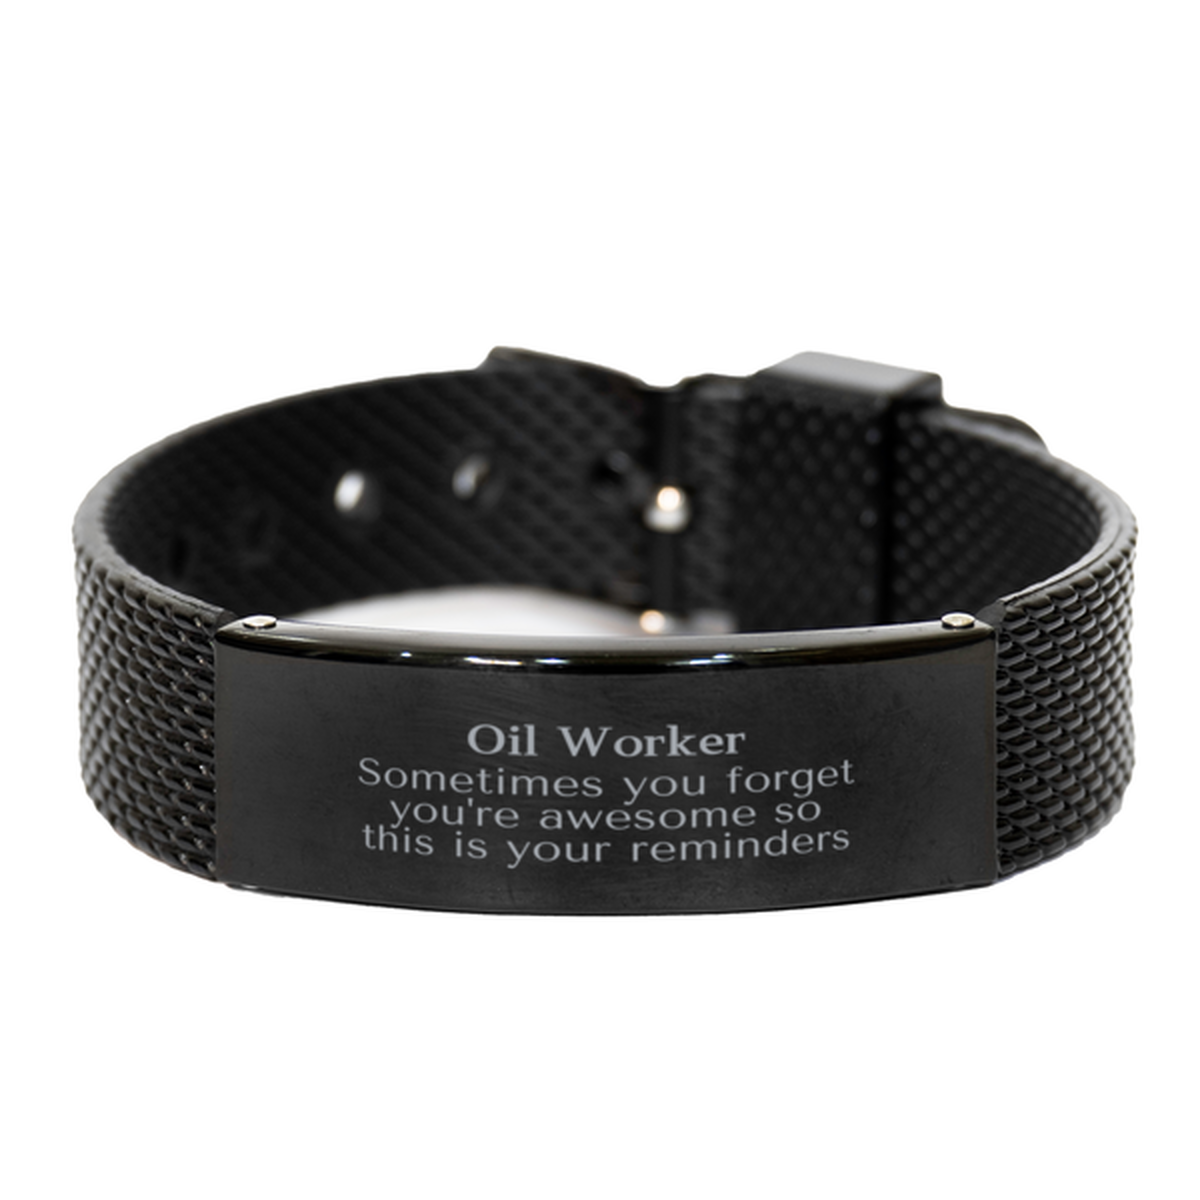 Sentimental Oil Worker Black Shark Mesh Bracelet, Oil Worker Sometimes you forget you're awesome so this is your reminders, Graduation Christmas Birthday Gifts for Oil Worker, Men, Women, Coworkers